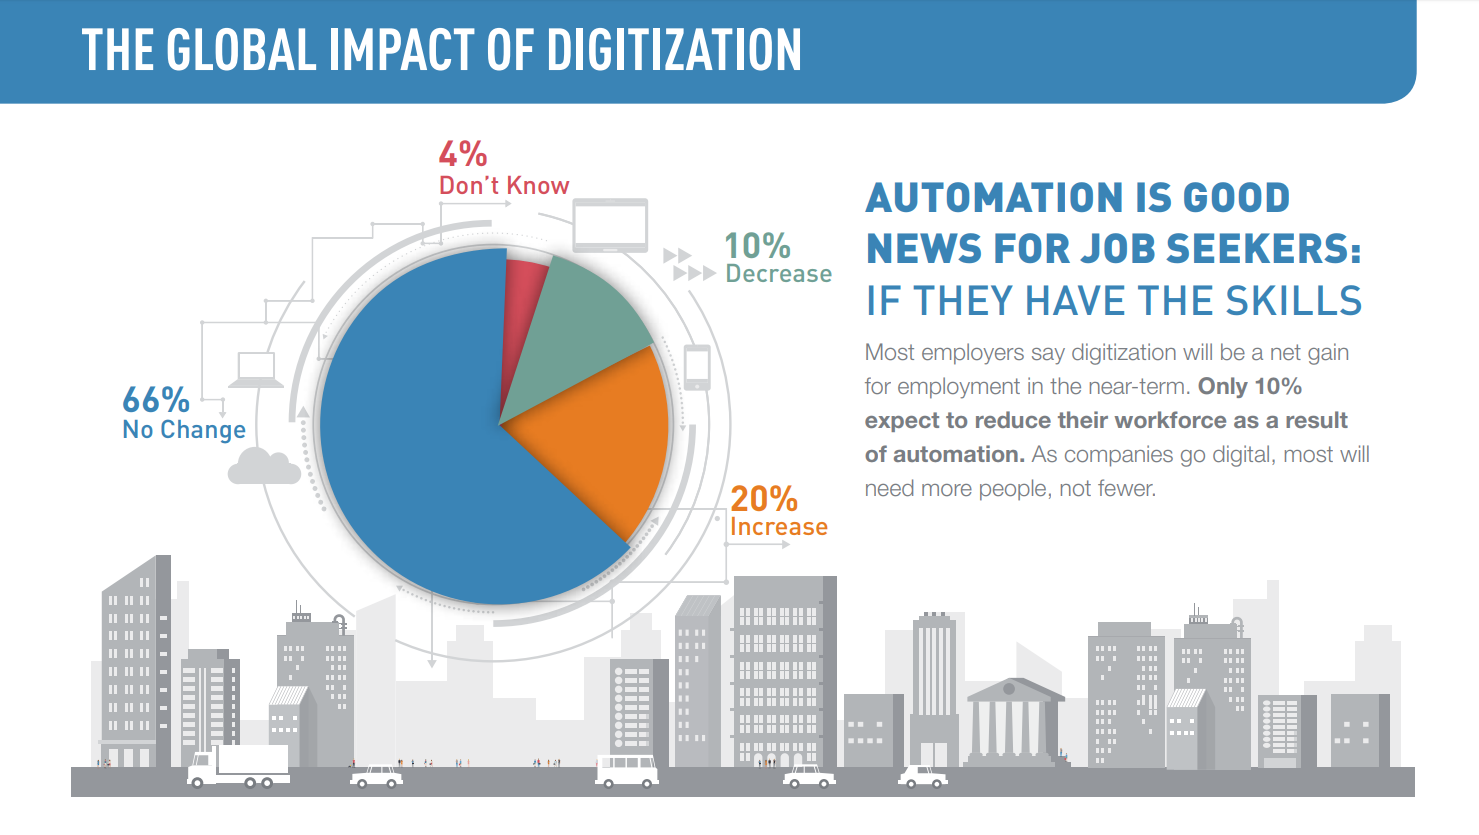 the image is a pie chart titled “The Global Impact of Digitization on Job Seekers”. Here’s a breakdown of the information in the chart: 66% of those surveyed believe that digitization will have “No Change” on employment. 20% believe digitization will lead to an “Increase” in jobs. 10% expect digitization to result in a “Decrease” in jobs and a reduction in their income. 4% said they “Don’t Know” what the impact of digitization will be. The text accompanying the pie chart further clarifies that most employers believe digitization will create more jobs, not fewer. They also acknowledge that some jobs will be lost to automation, but that new opportunities will be created. The key message seems to be that workers who have the skills needed for the digital economy will be most successful in the job market. So, the overall message of the pie chart is that digitization is likely to have a positive impact on job seekers, but that some workers will need to develop new skills to stay competitive.